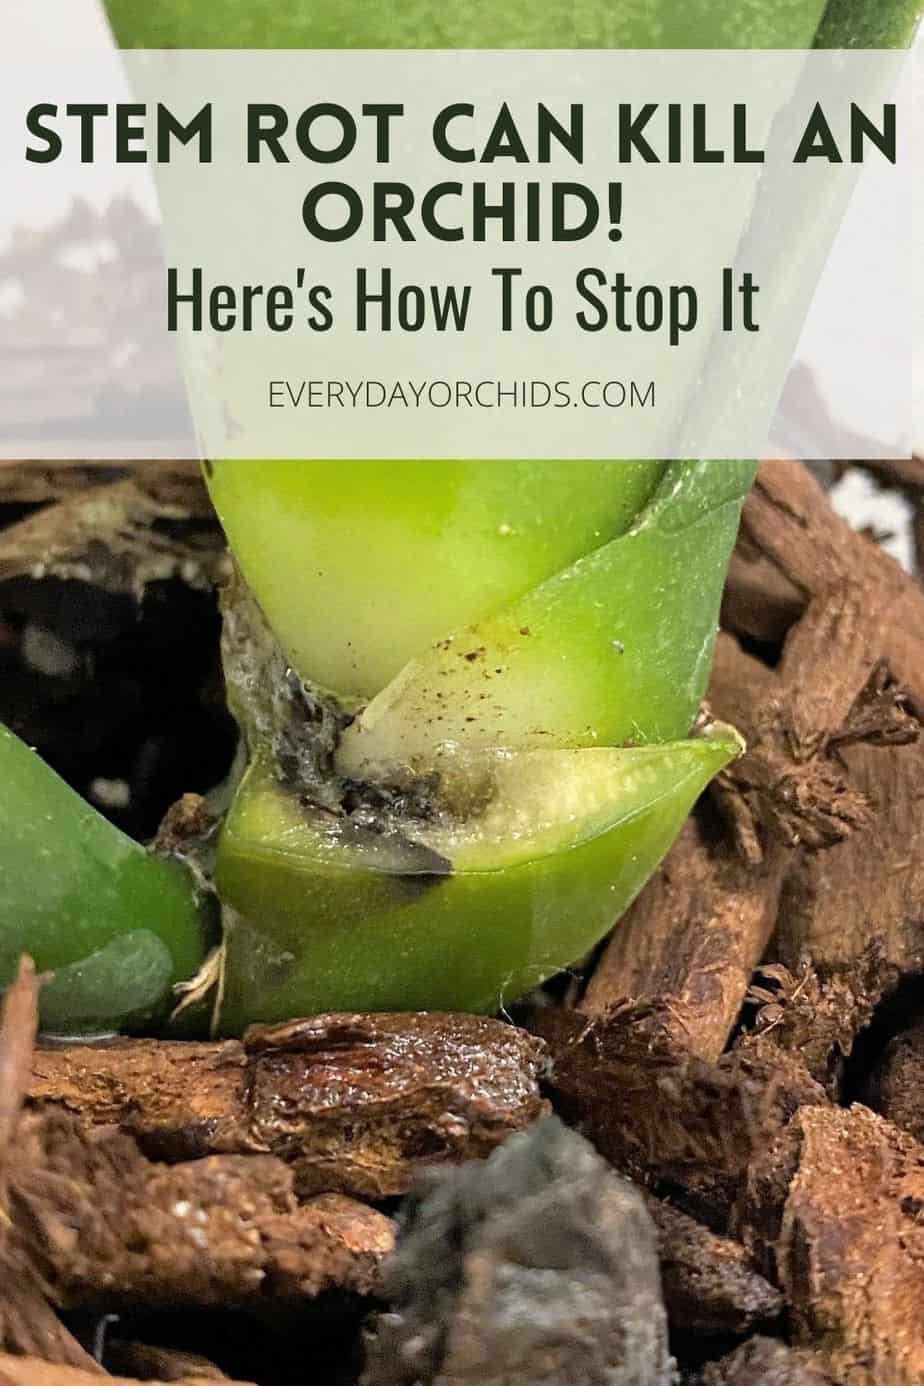 How To Identify And Treat Stem Rot In Orchids - Everyday Orchids